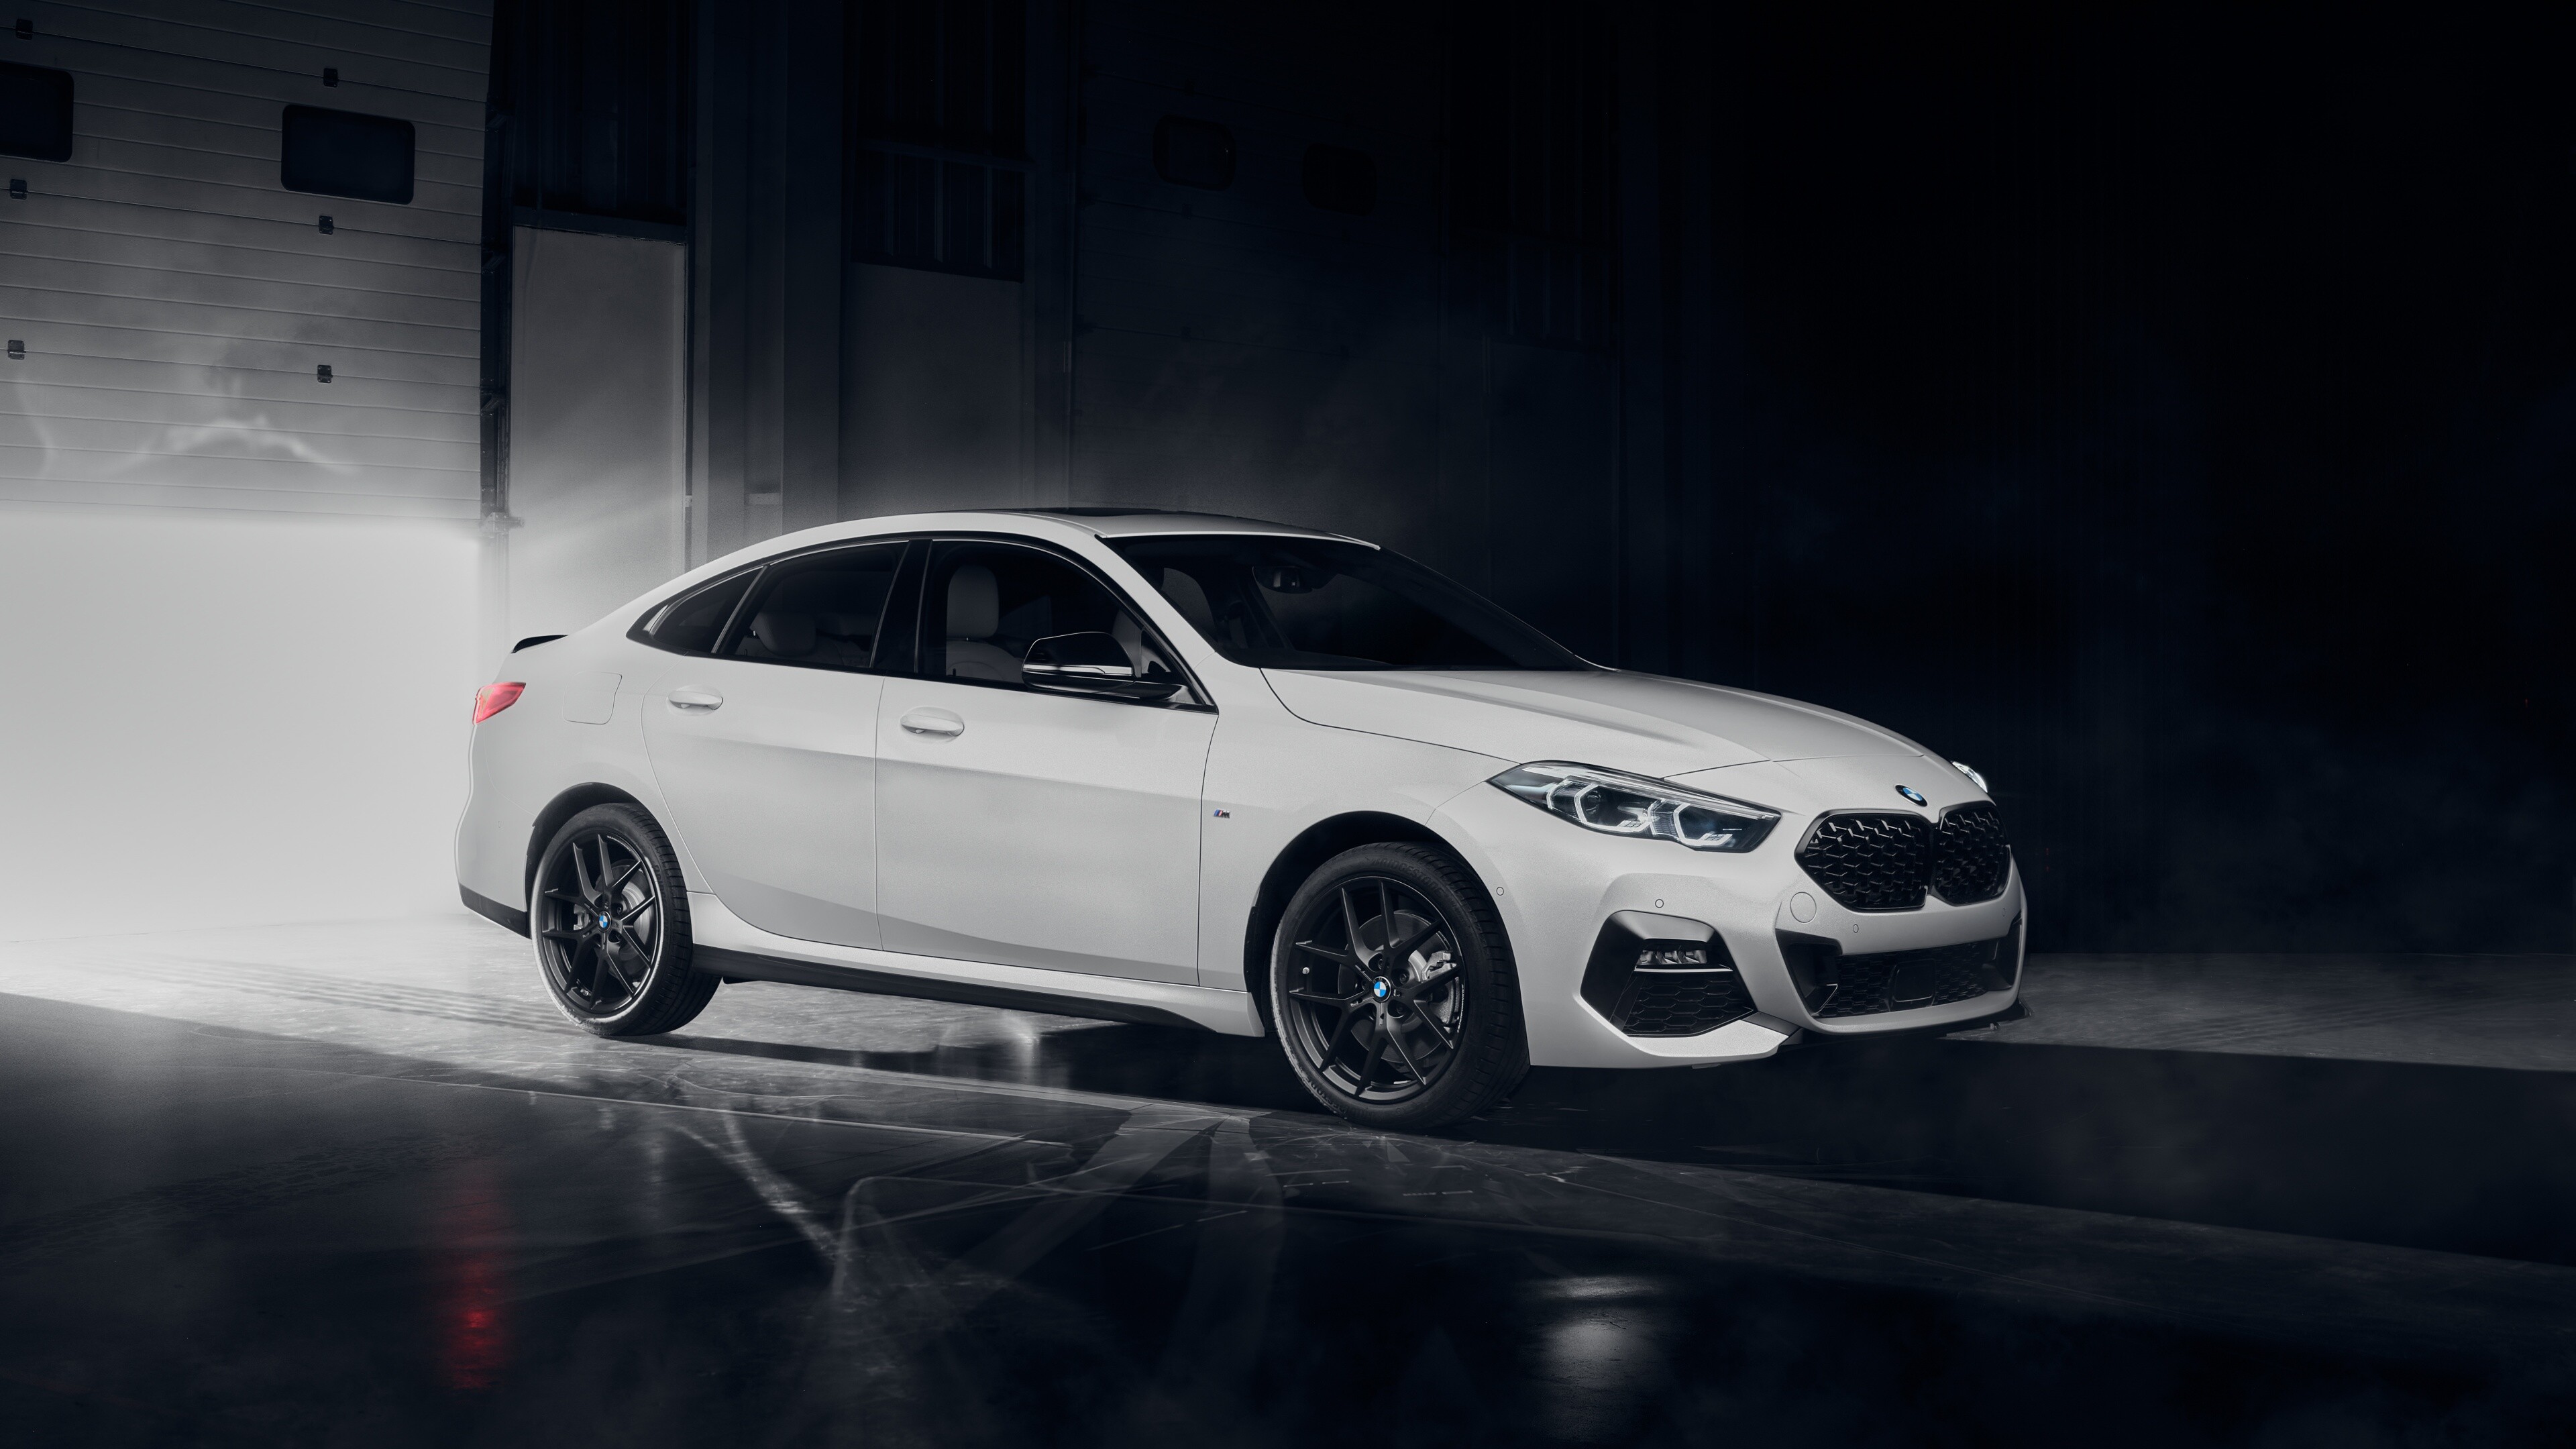 BMW 2 Series: A German multinational manufacturer of performance luxury vehicles, 220d Gran Coupe. 3840x2160 4K Wallpaper.